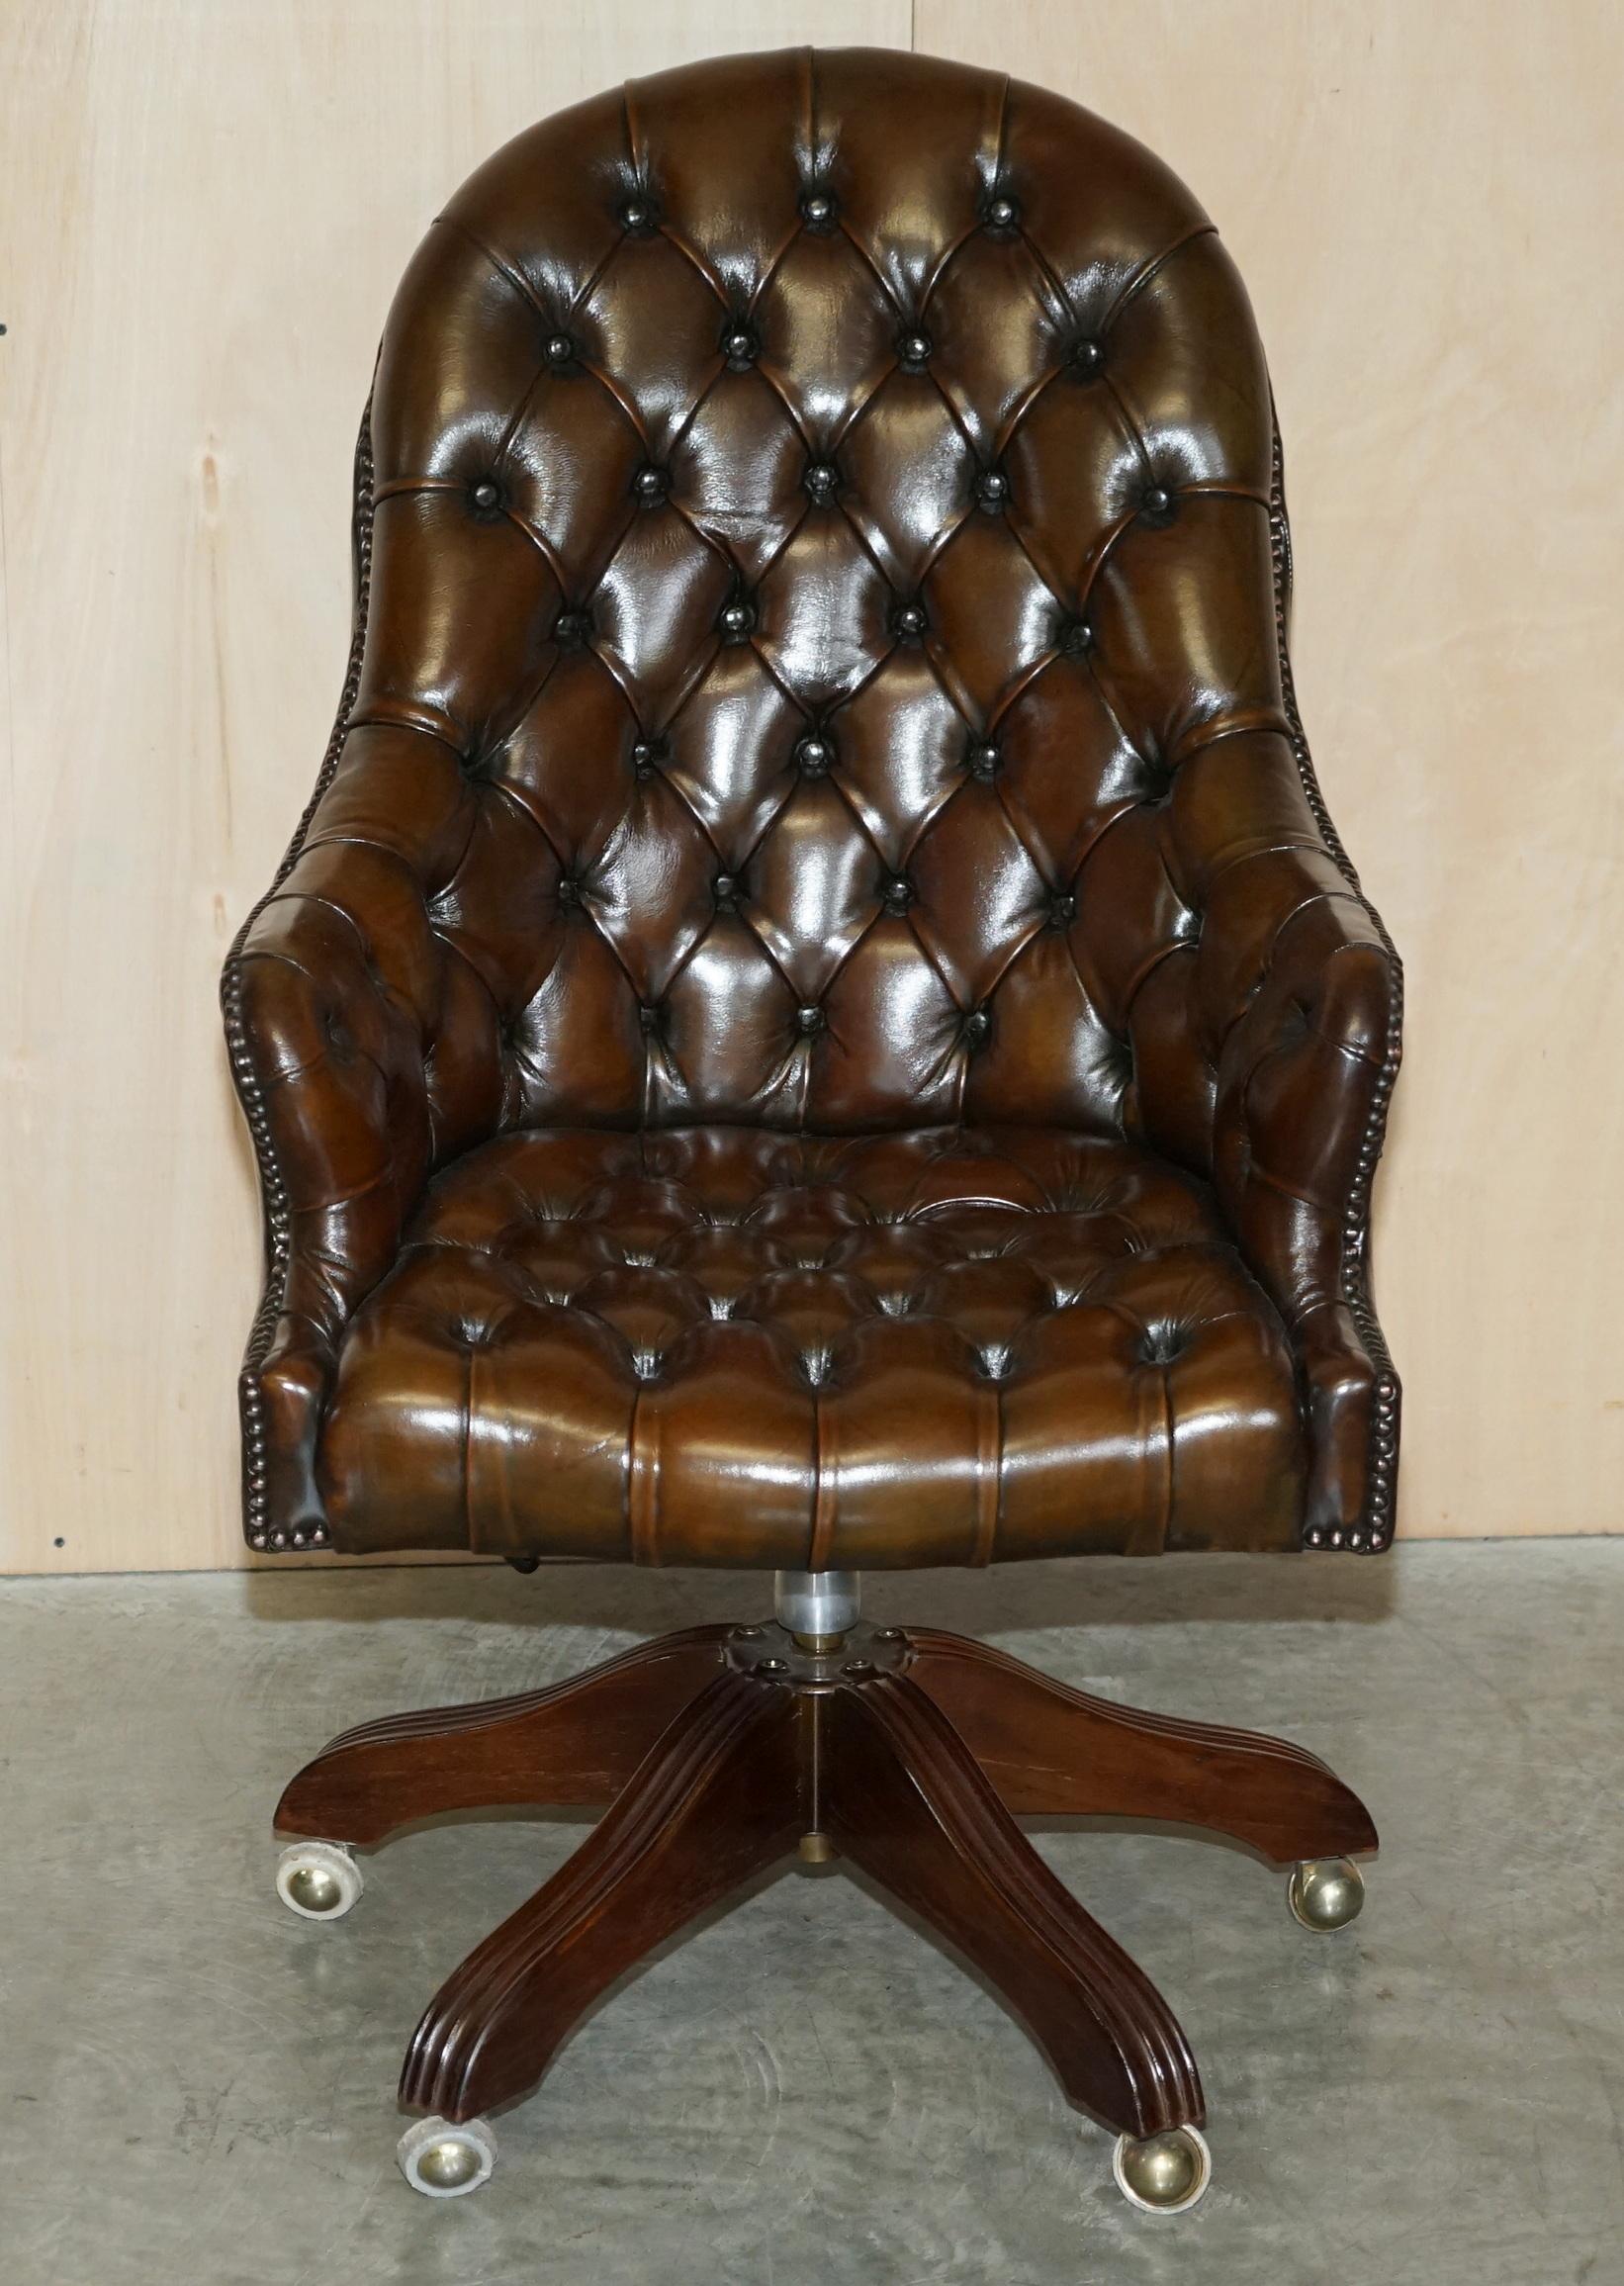 1 of 2 Wade England Restored Chesterfield Swivel Brown Leather Captains Chairs 10